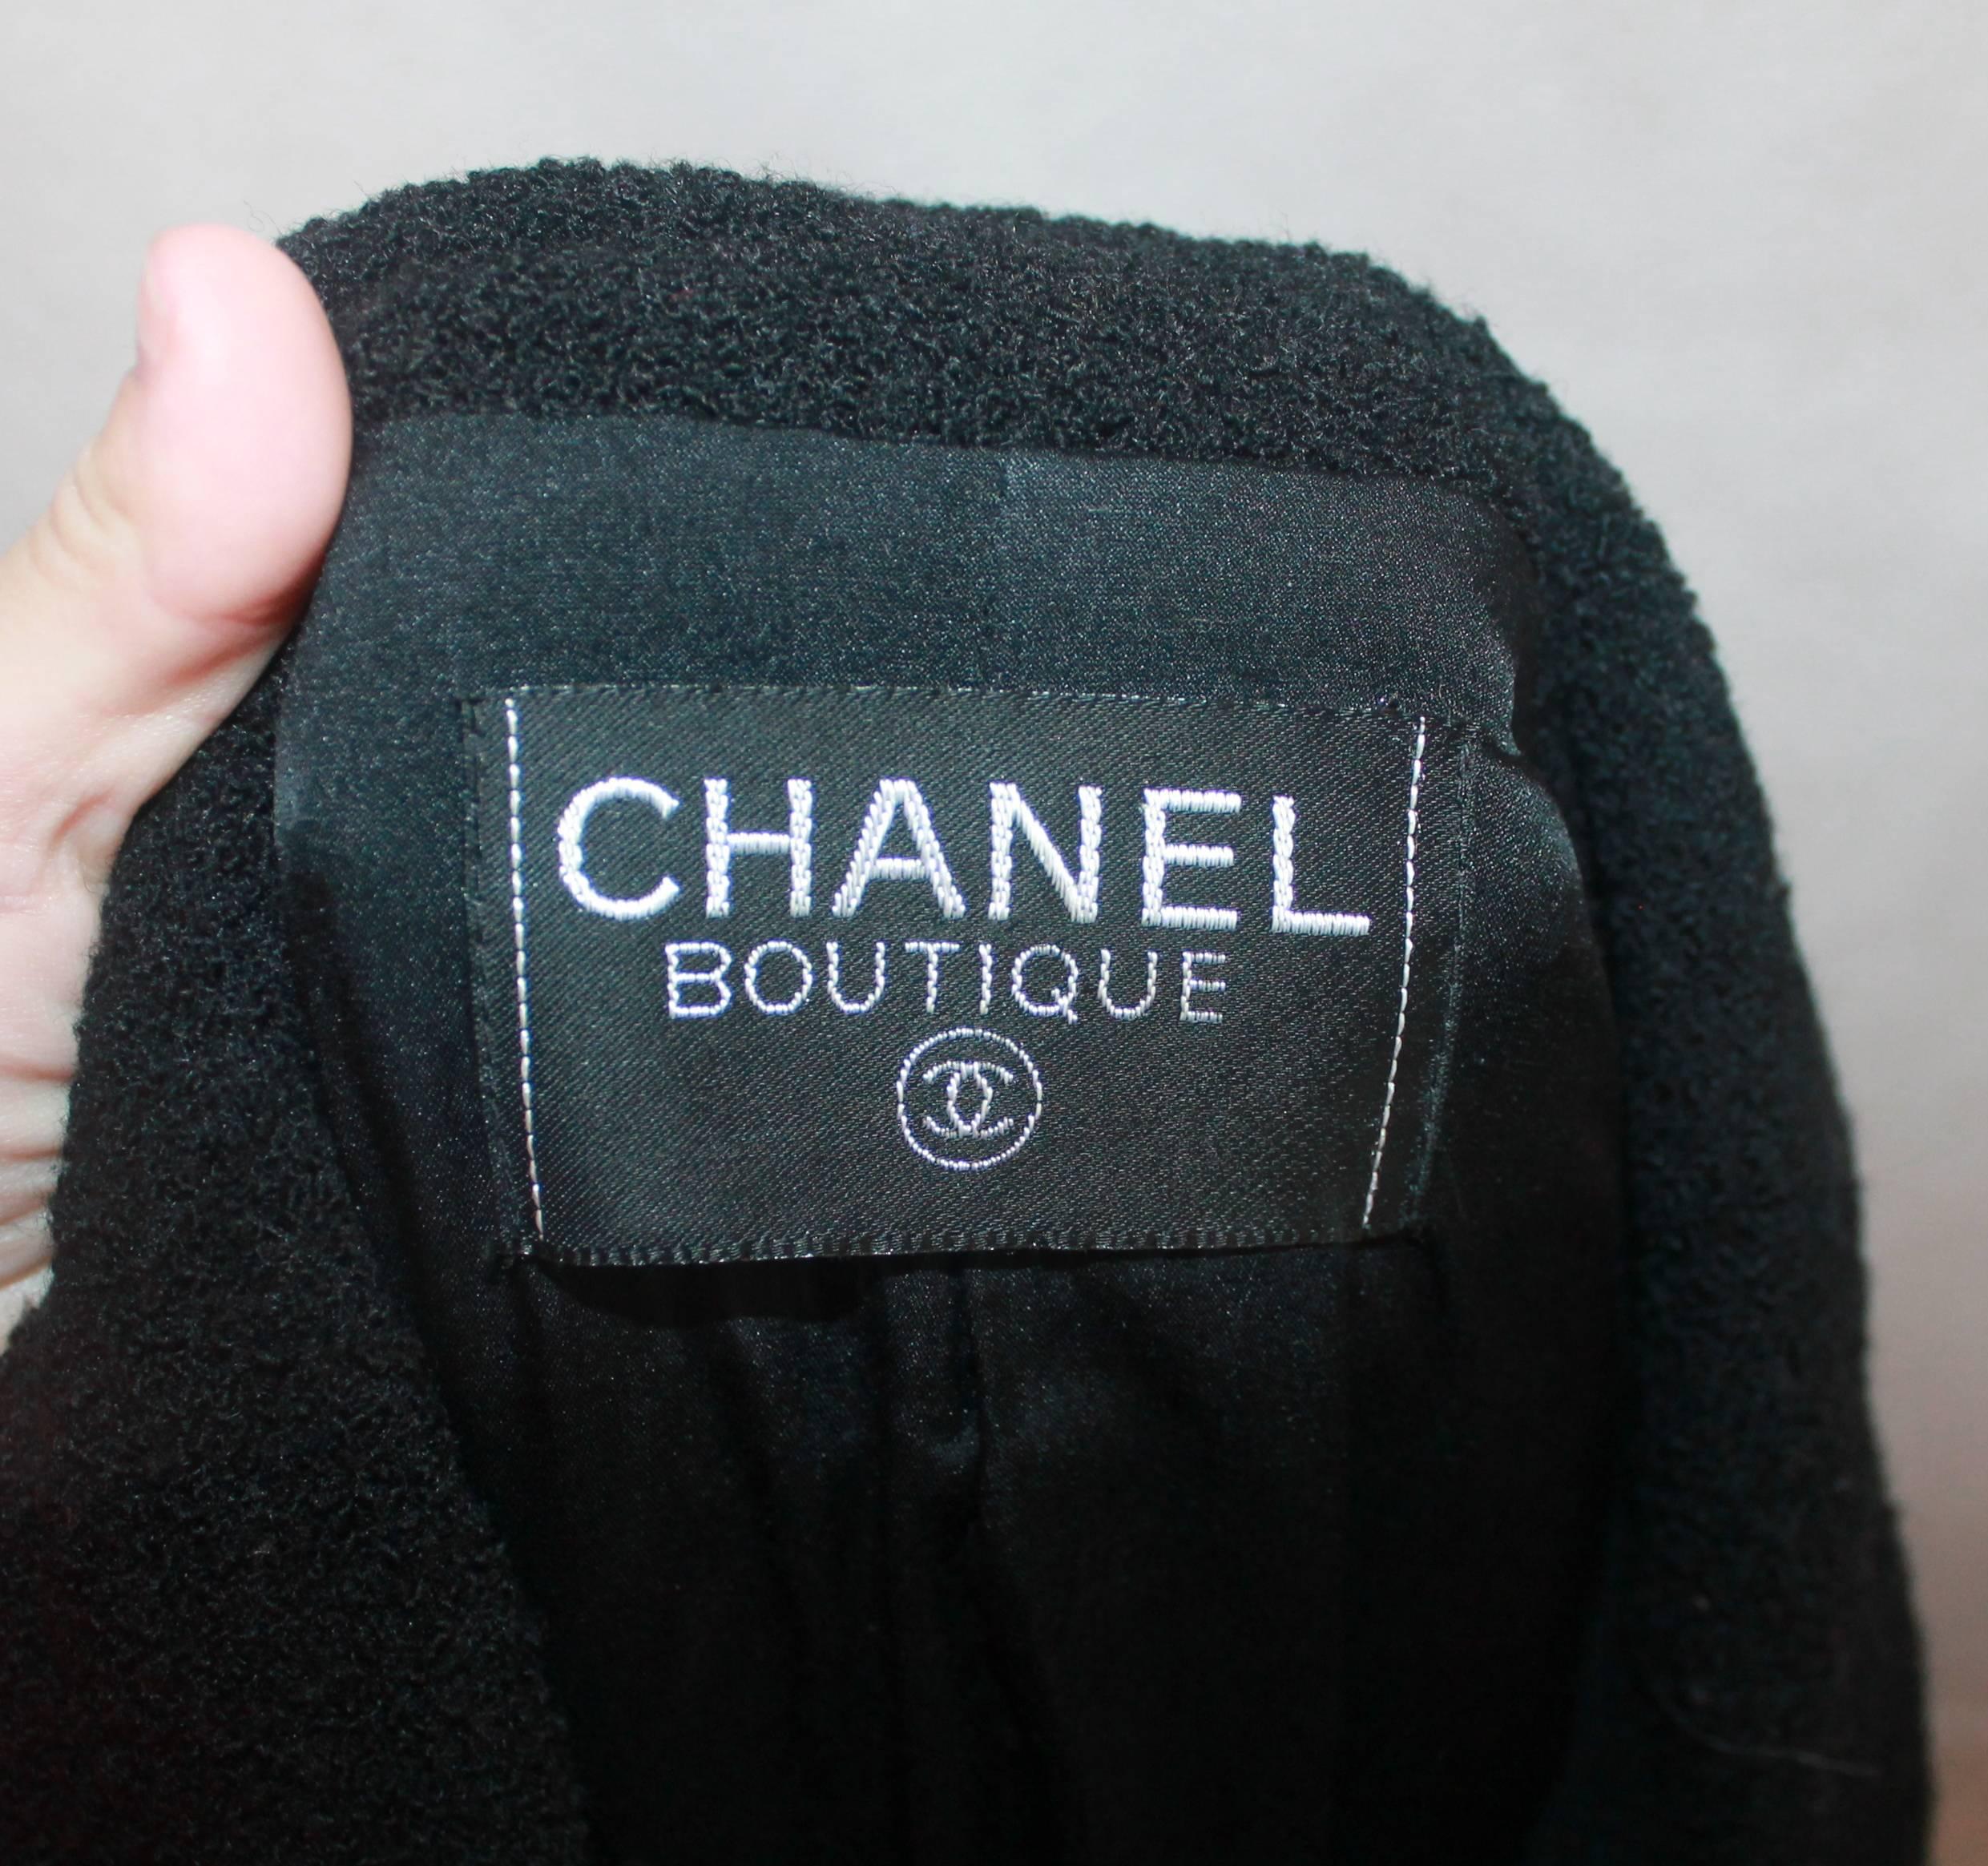 Chanel Vintage Black Wool Long Jacket with Neck Tie - 40 - circa 1980's 1